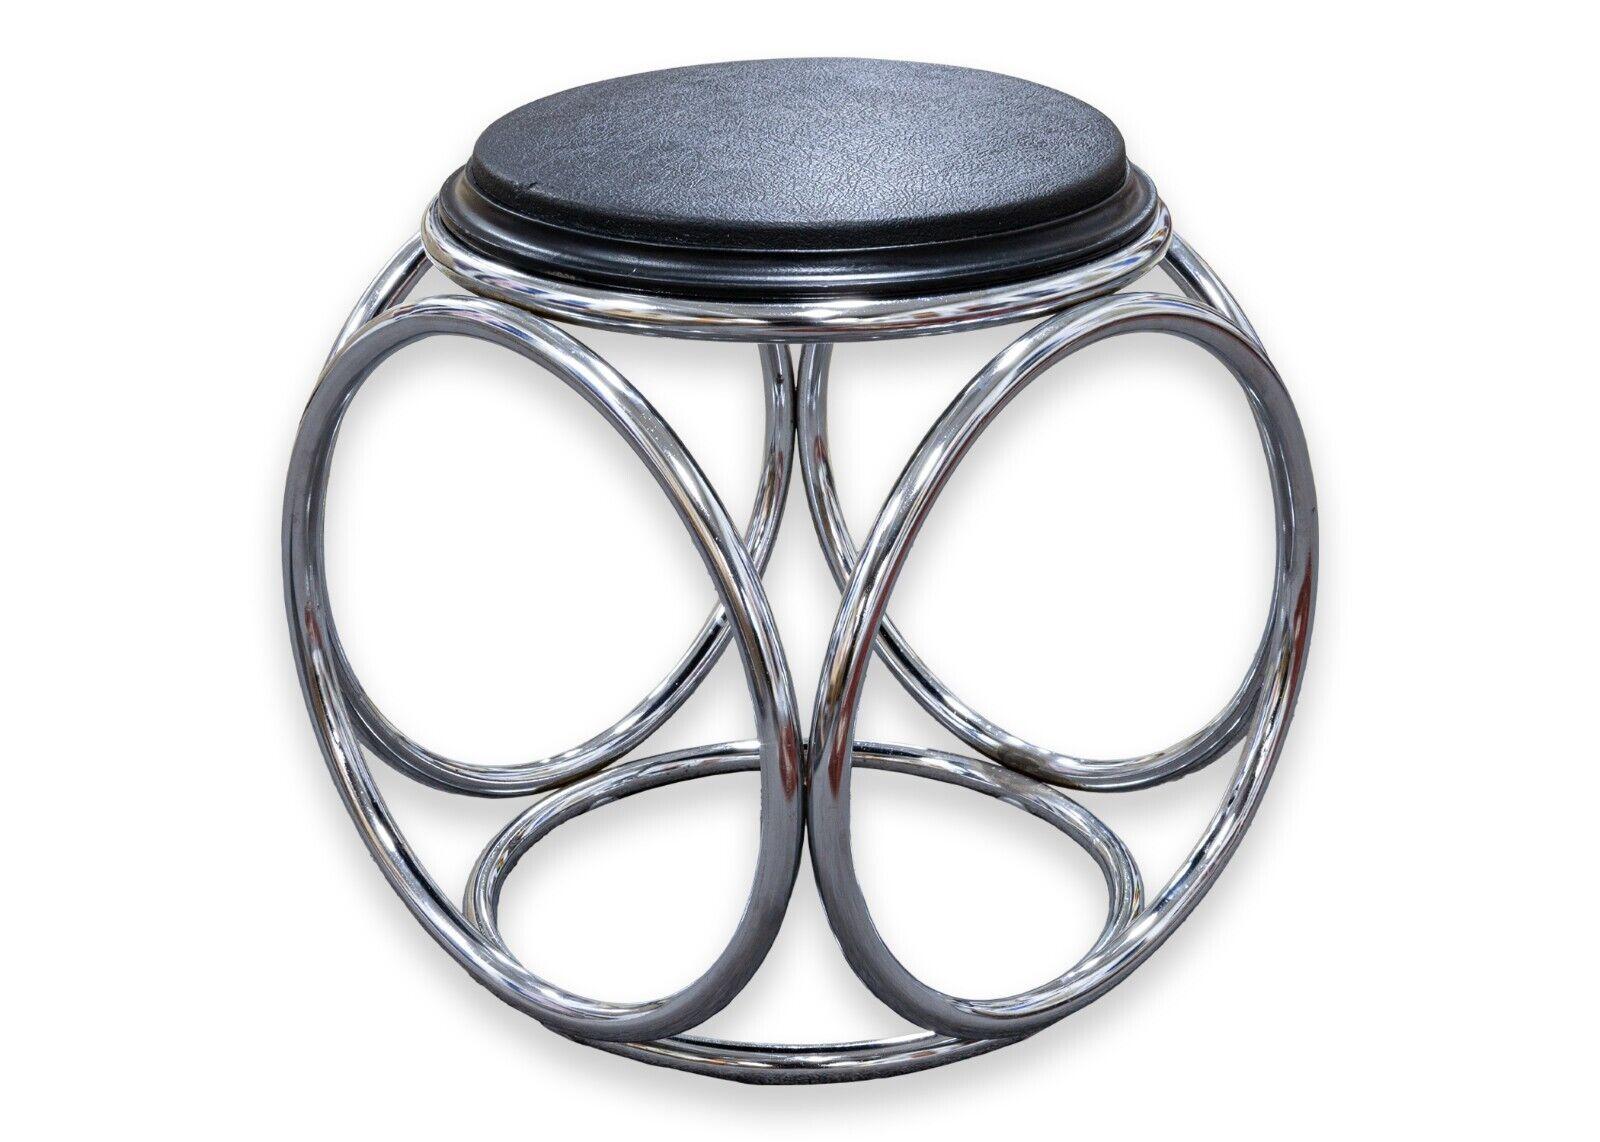 A pair of Jean Pierre Laporte French art deco stool/end side tables. A very unique, chic pair of hybrid pieces. Constructed with a clean, chrome and black plastic, these pieces have a very sophisticated design. The black tops are flippable with one